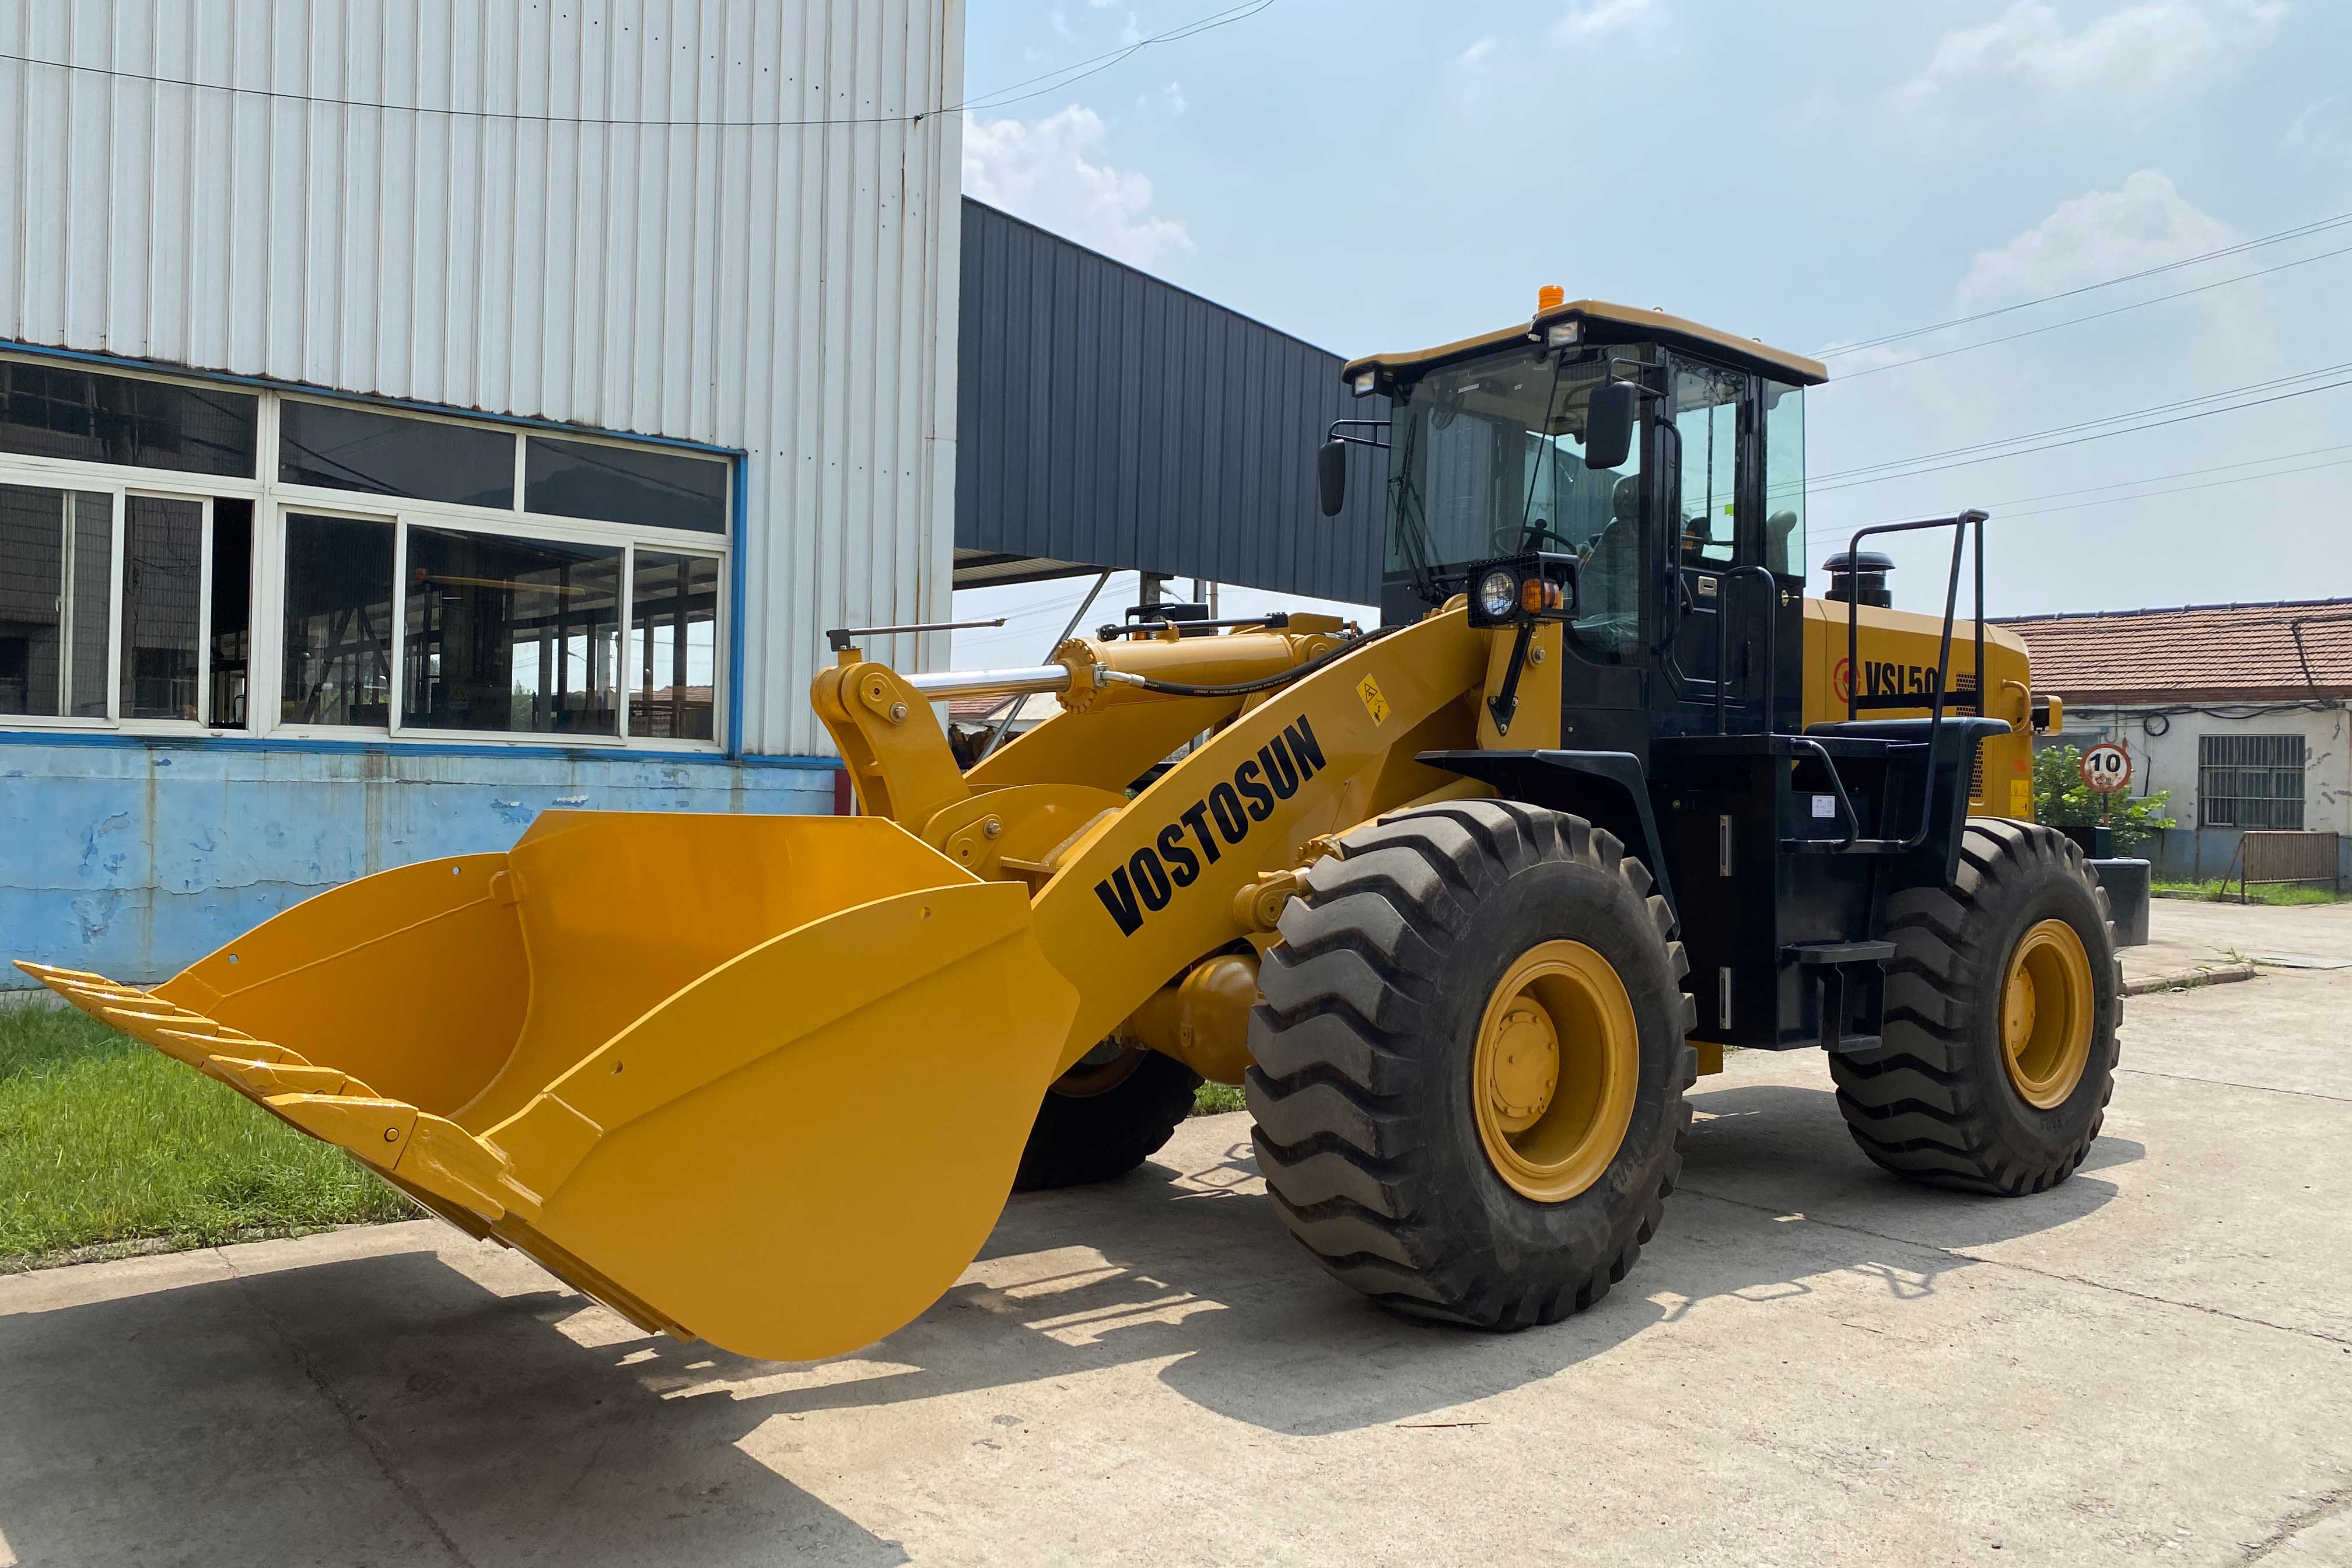 On August 28, 2020, VOSTOSUN’s wheel loader was tested ,then packed and transported to Ukraine.